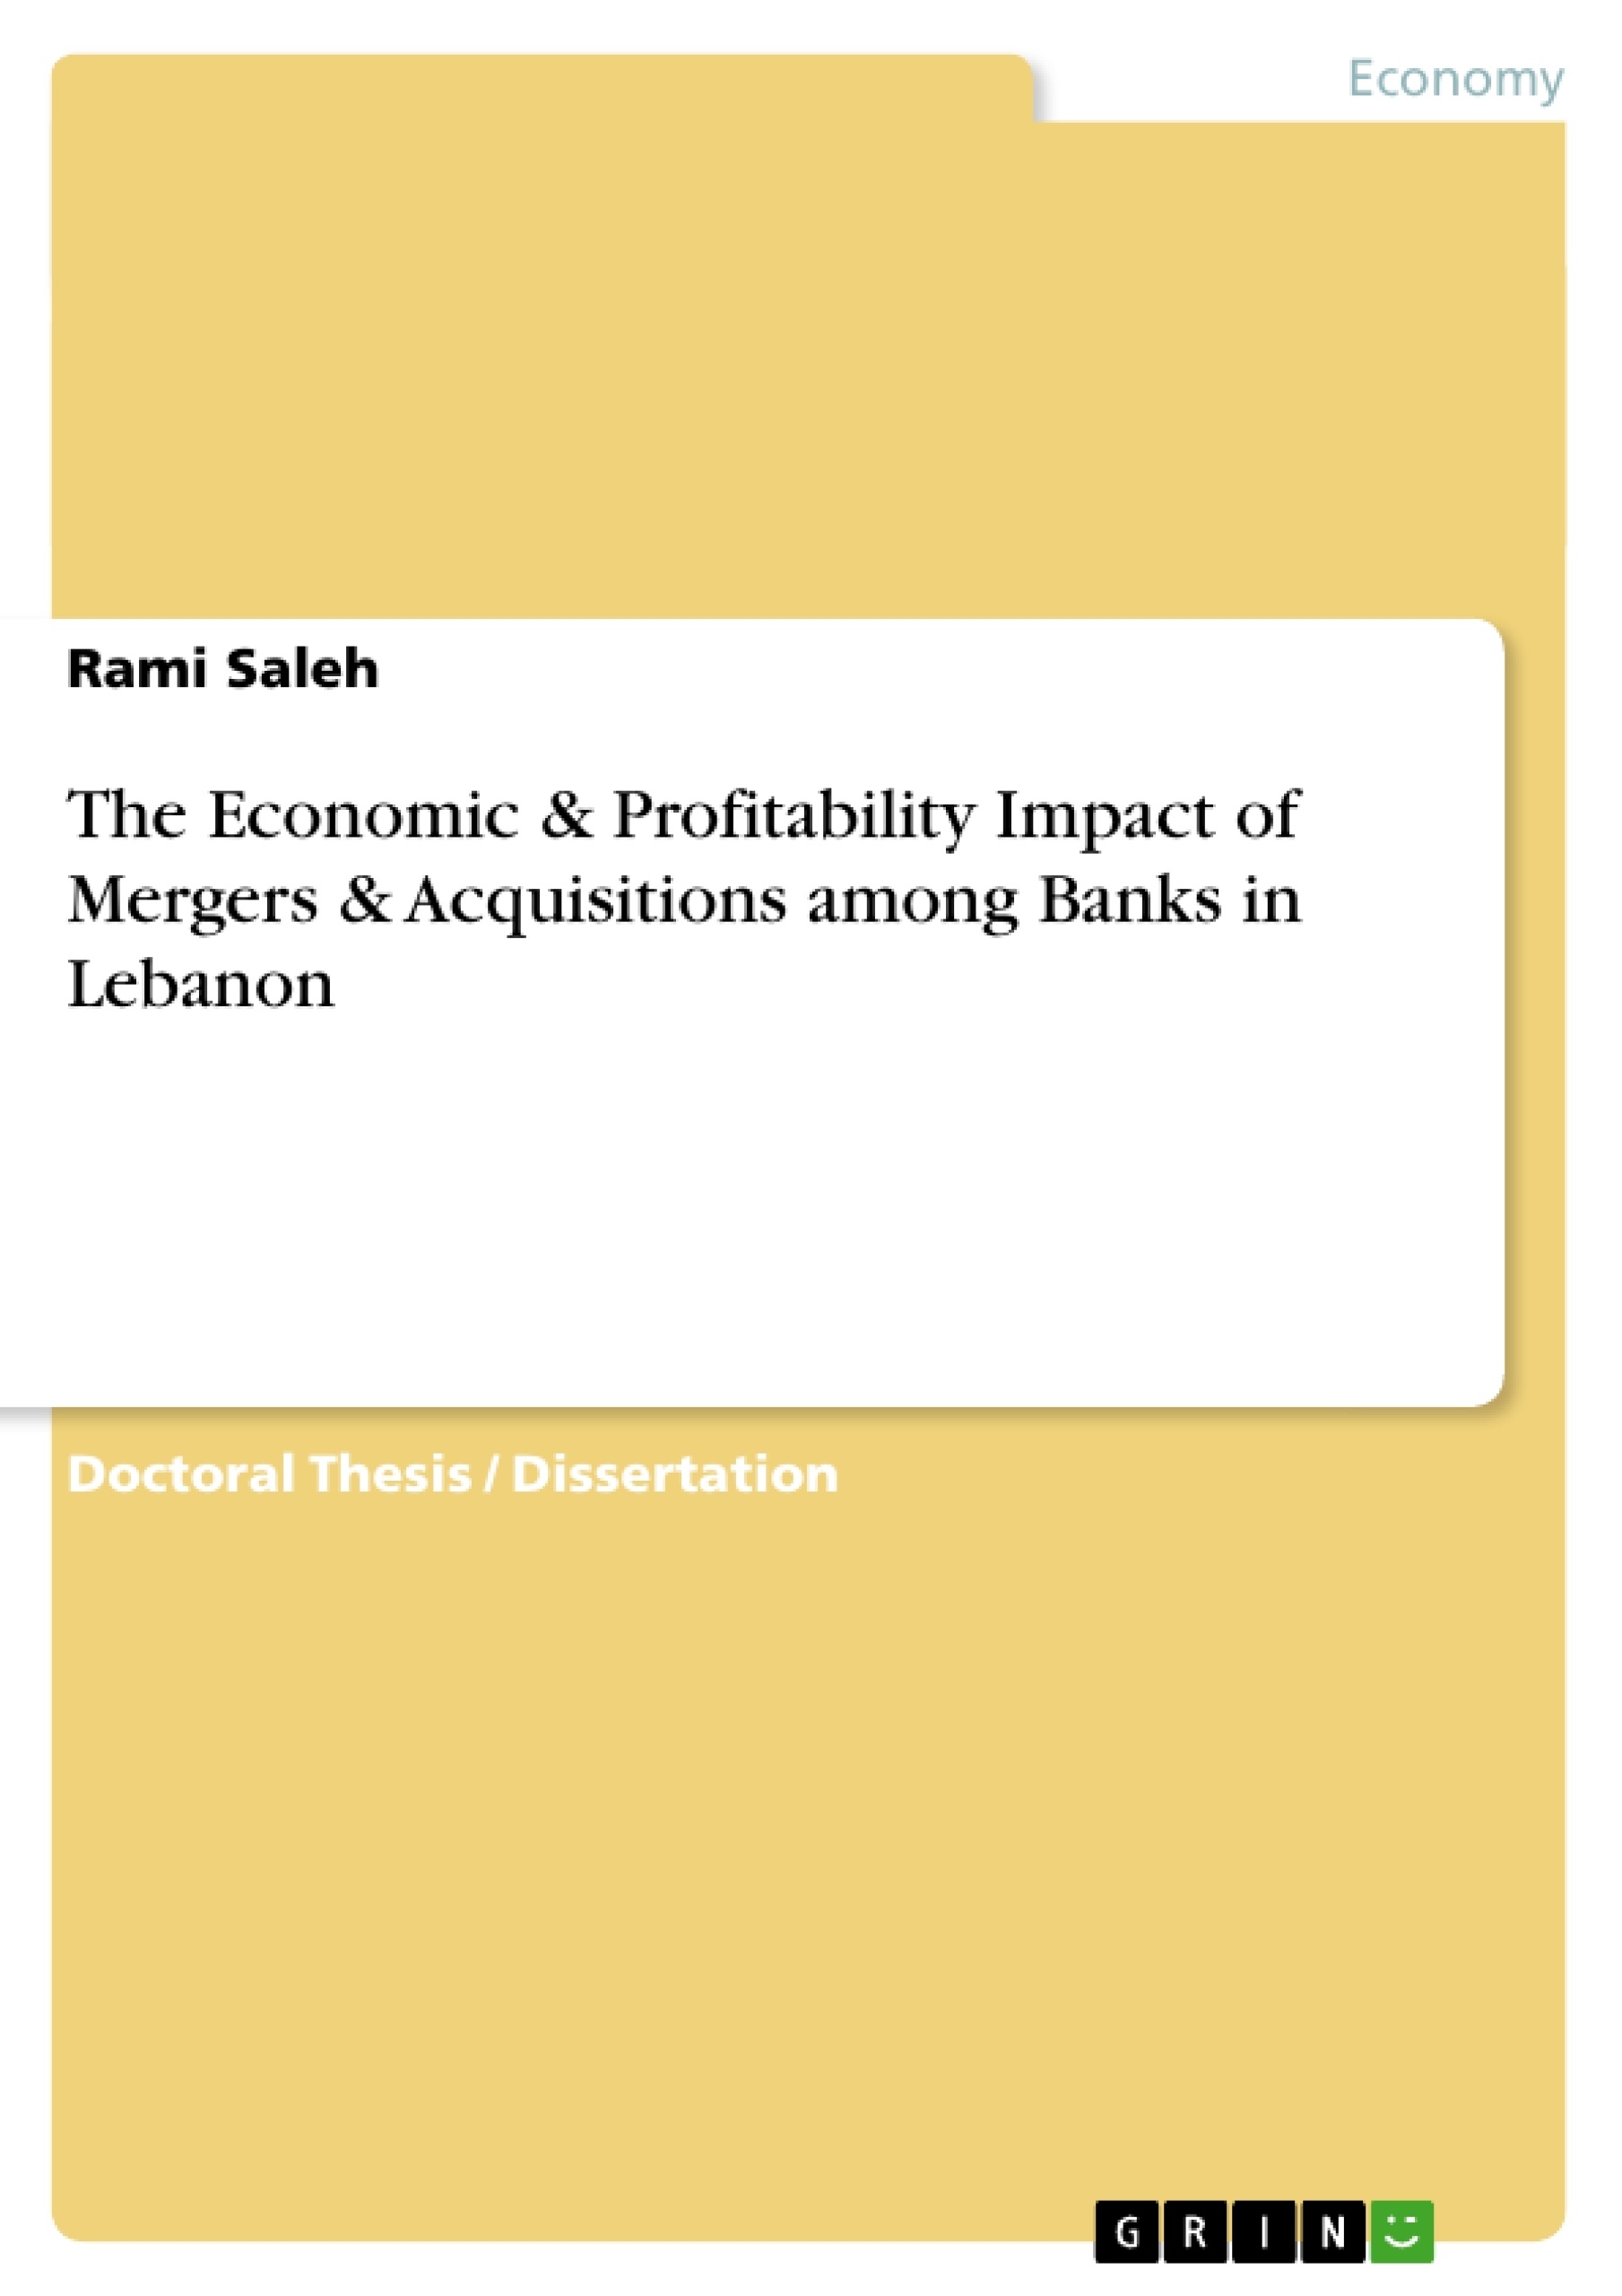 Title: The Economic & Profitability Impact of Mergers & Acquisitions among Banks in Lebanon